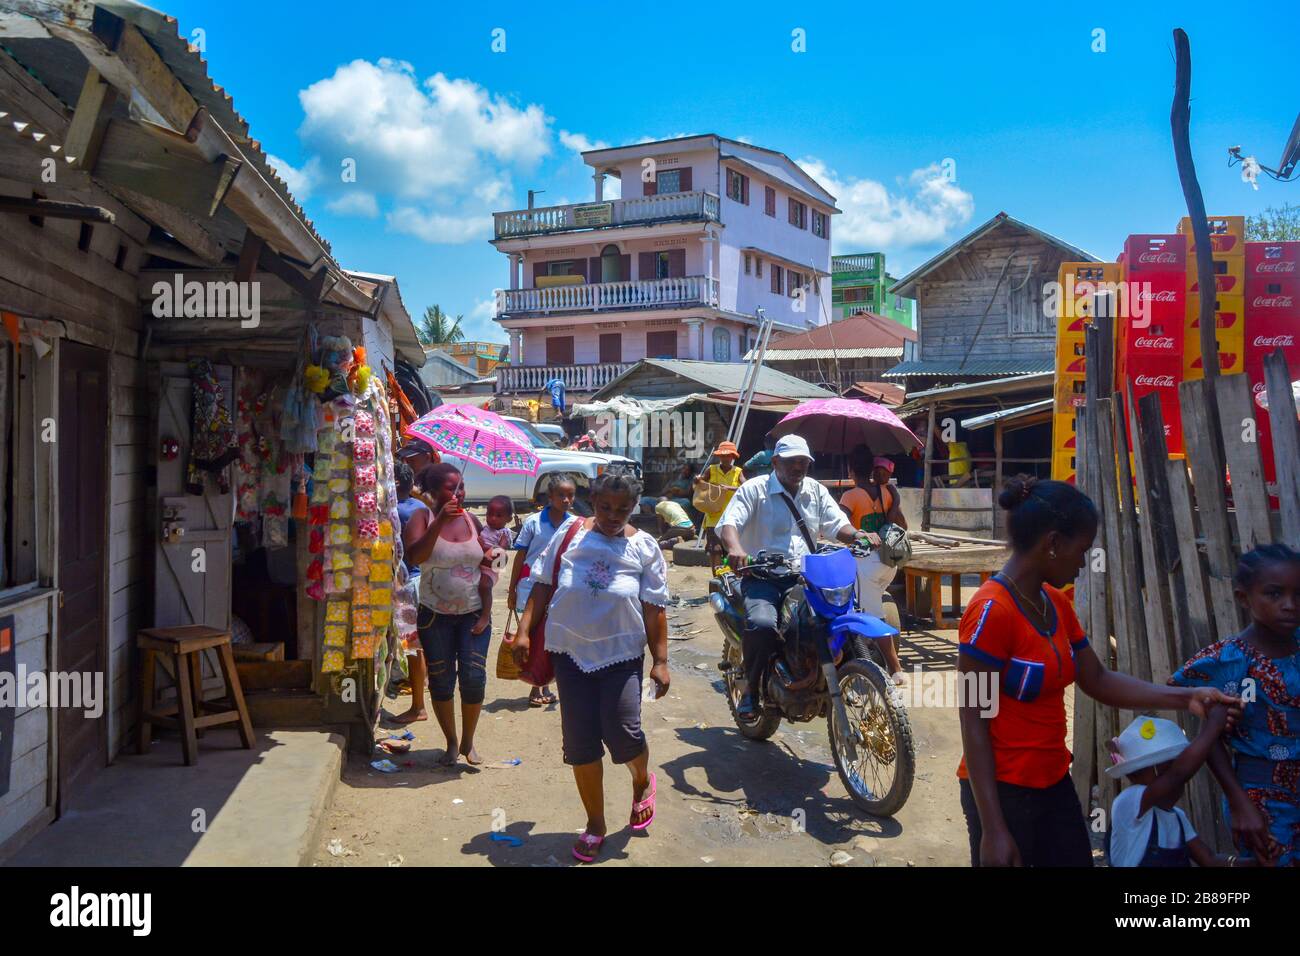 Soanierana Ivongo, Madagascar, Africa 01/08/20: African black people walking in the chaotic and dusty street of a small coastal town, colorful relax Stock Photo